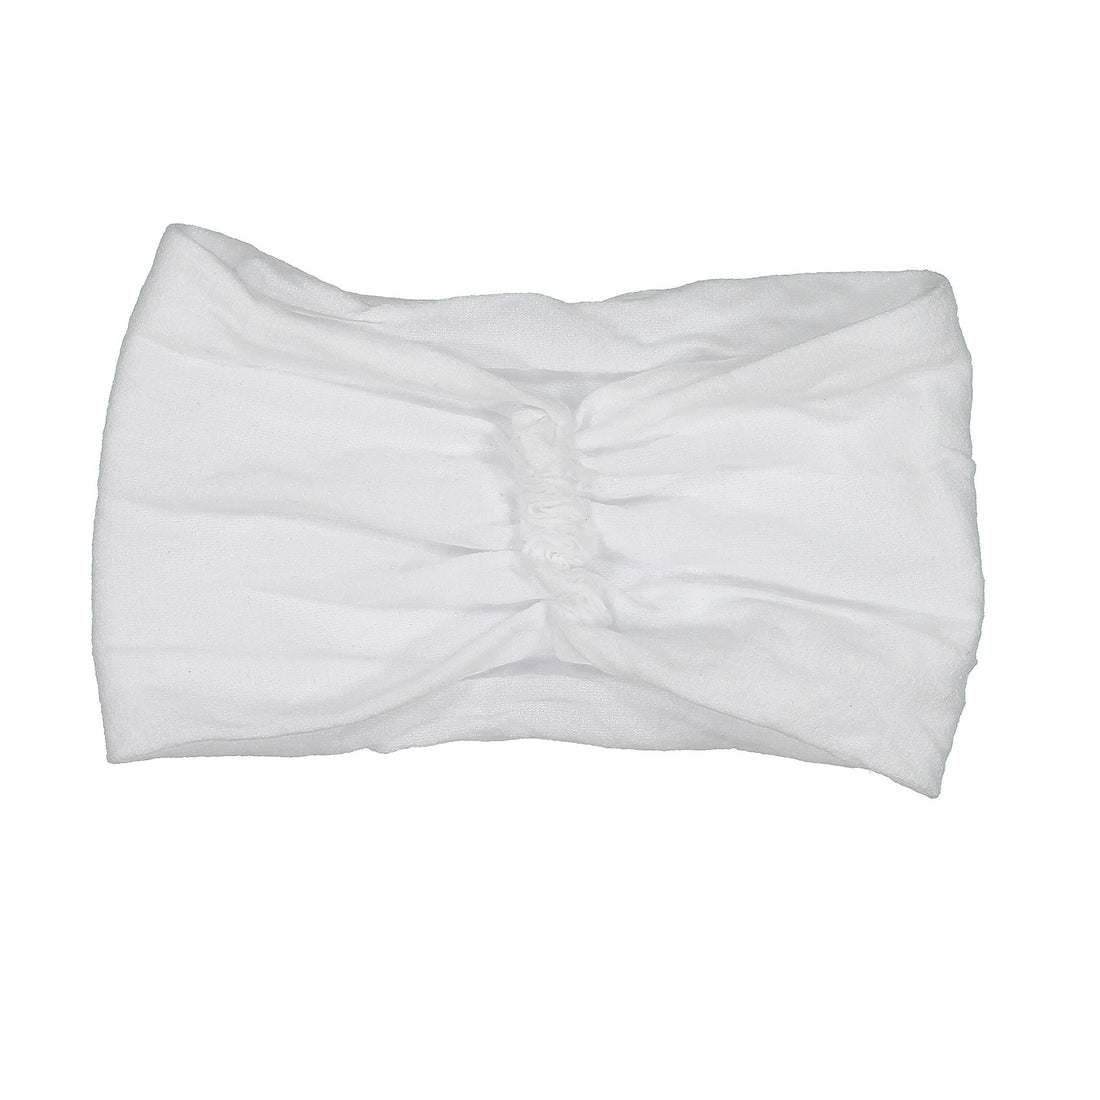 Knot Hairbands White Ruffle Headwrap